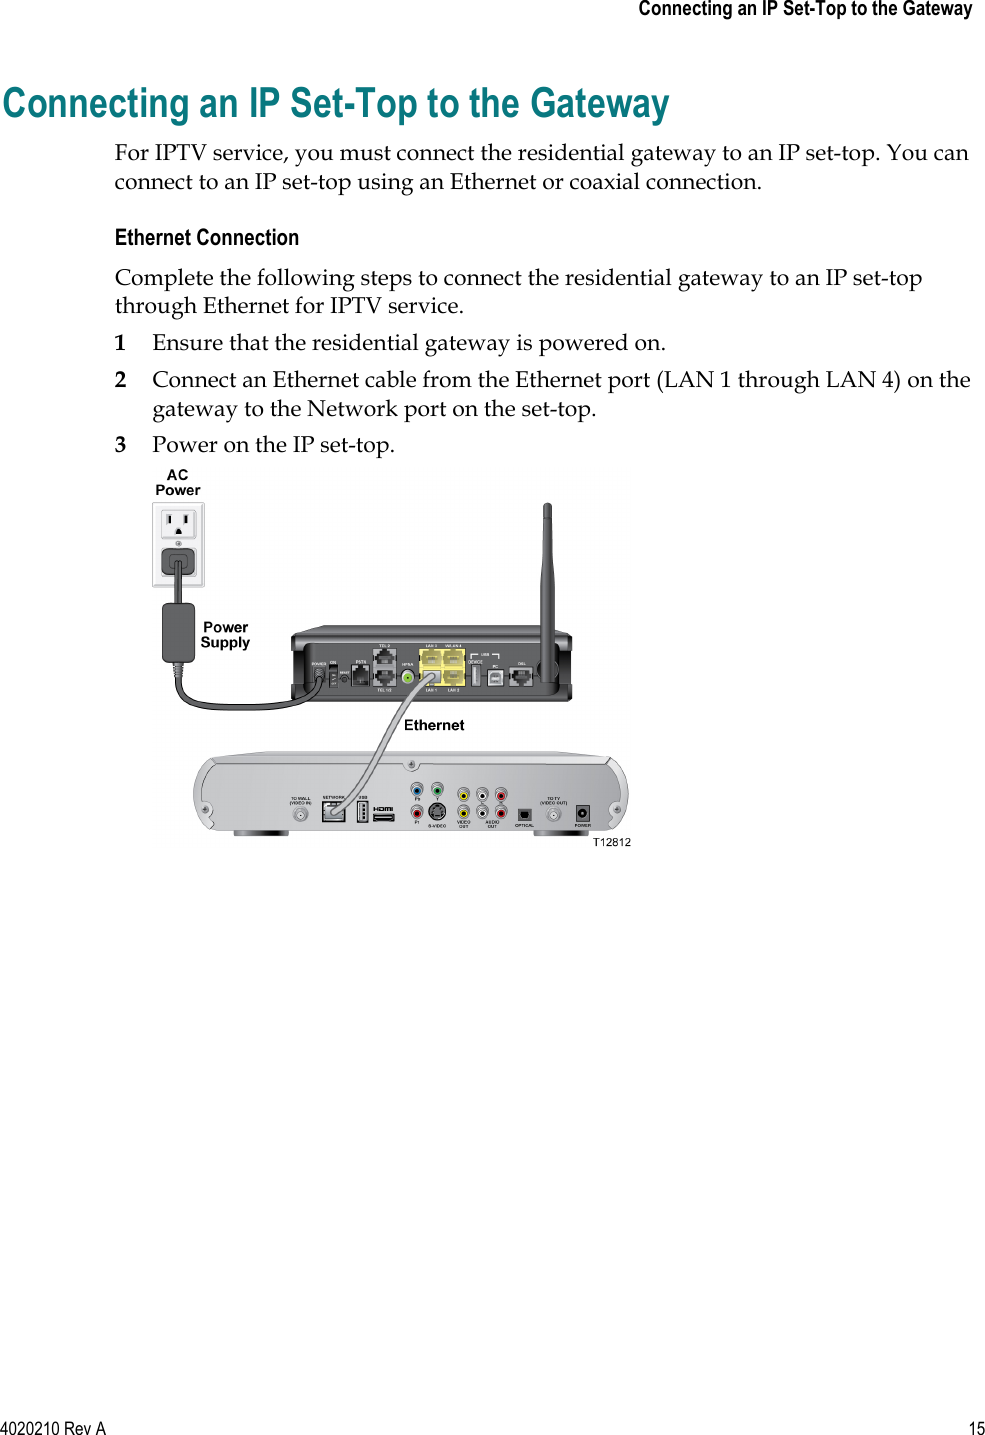    Connecting an IP Set-Top to the Gateway 4020210 Rev A 15  Connecting an IP Set-Top to the Gateway For IPTV service, you must connect the residential gateway to an IP set-top. You can connect to an IP set-top using an Ethernet or coaxial connection. Ethernet Connection Complete the following steps to connect the residential gateway to an IP set-top through Ethernet for IPTV service. 1 Ensure that the residential gateway is powered on. 2 Connect an Ethernet cable from the Ethernet port (LAN 1 through LAN 4) on the gateway to the Network port on the set-top. 3 Power on the IP set-top.  